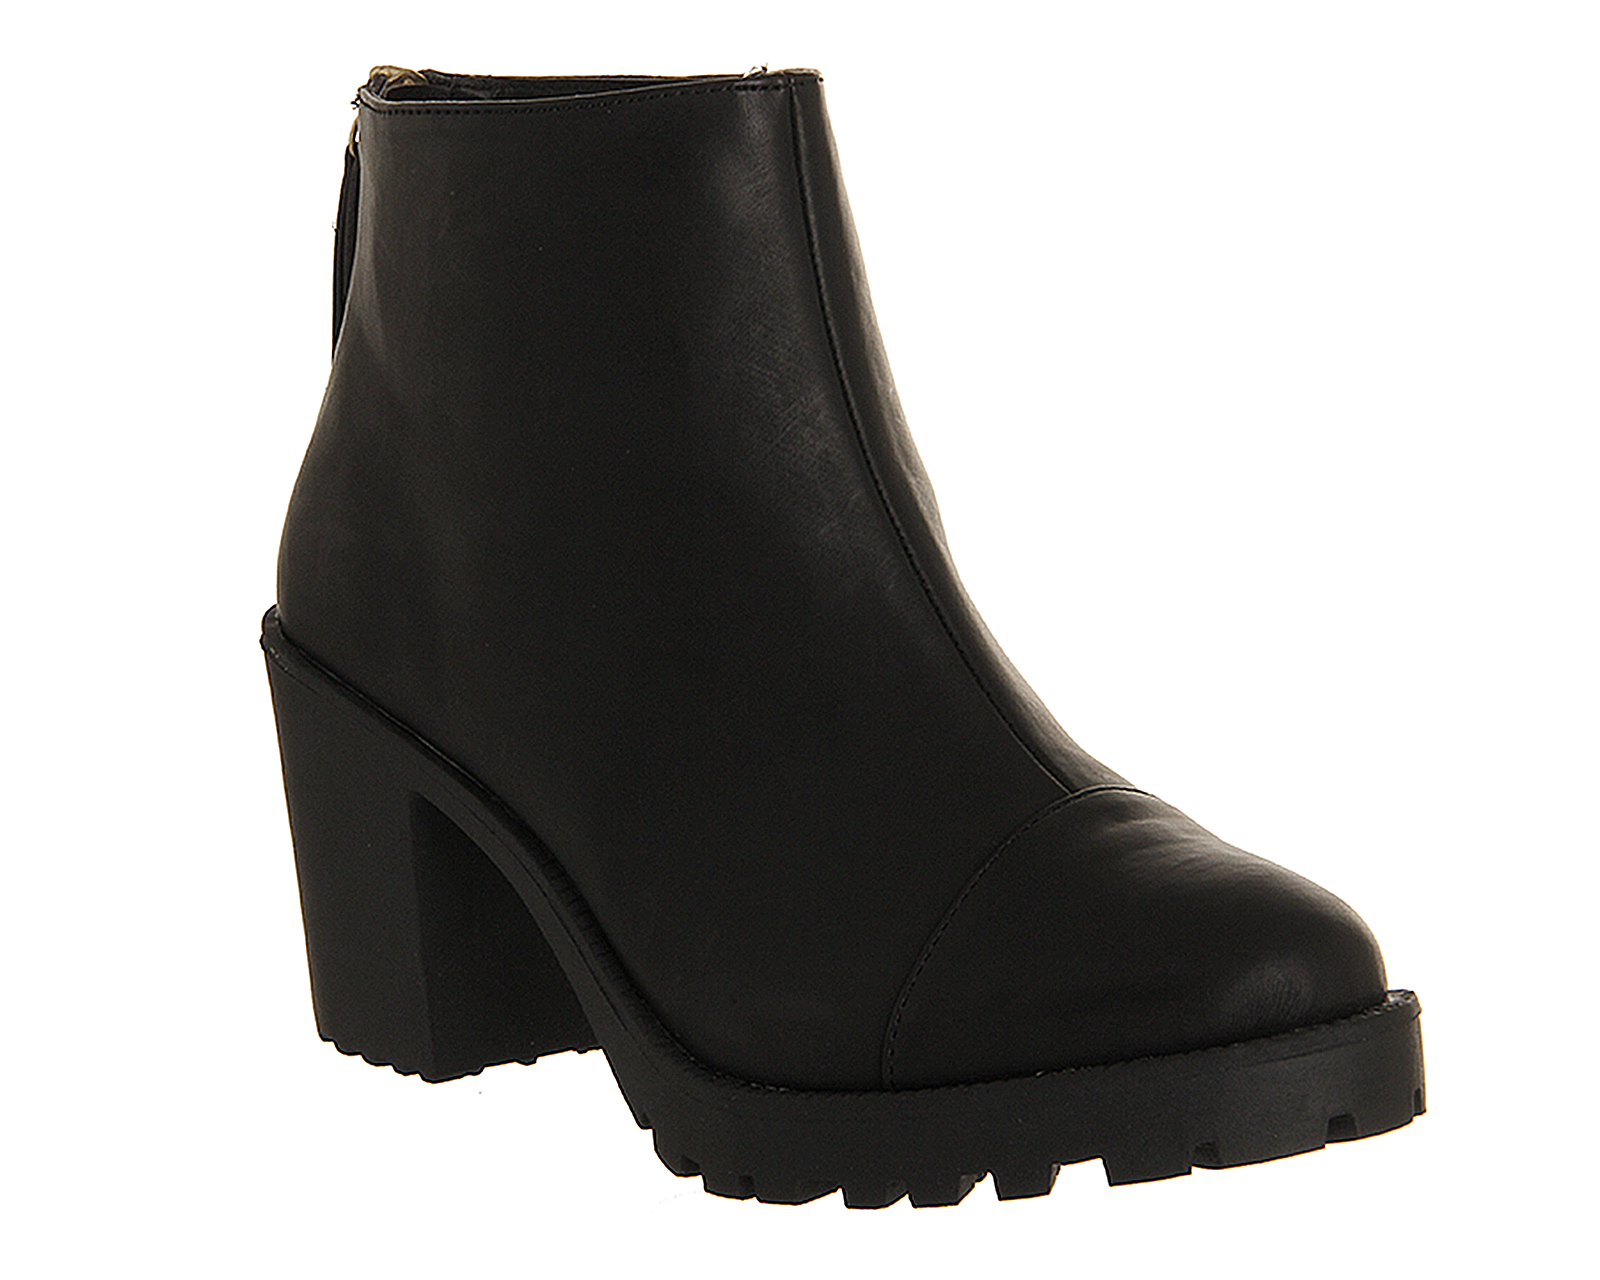 OFFICEConnie Back Zip bootsBlack